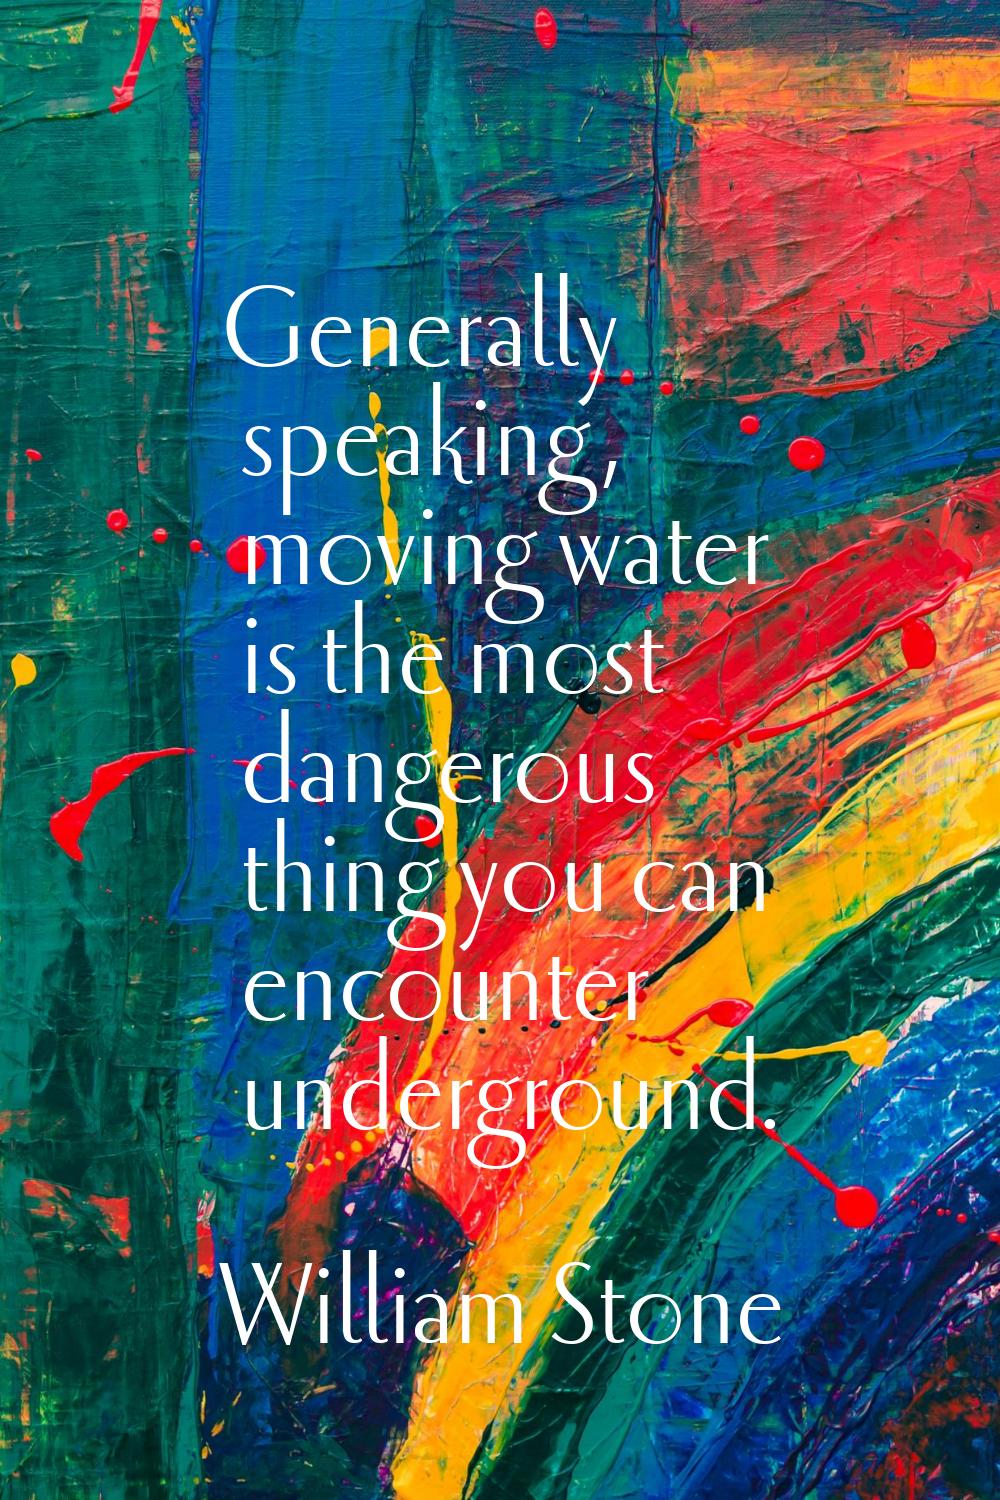 Generally speaking, moving water is the most dangerous thing you can encounter underground.